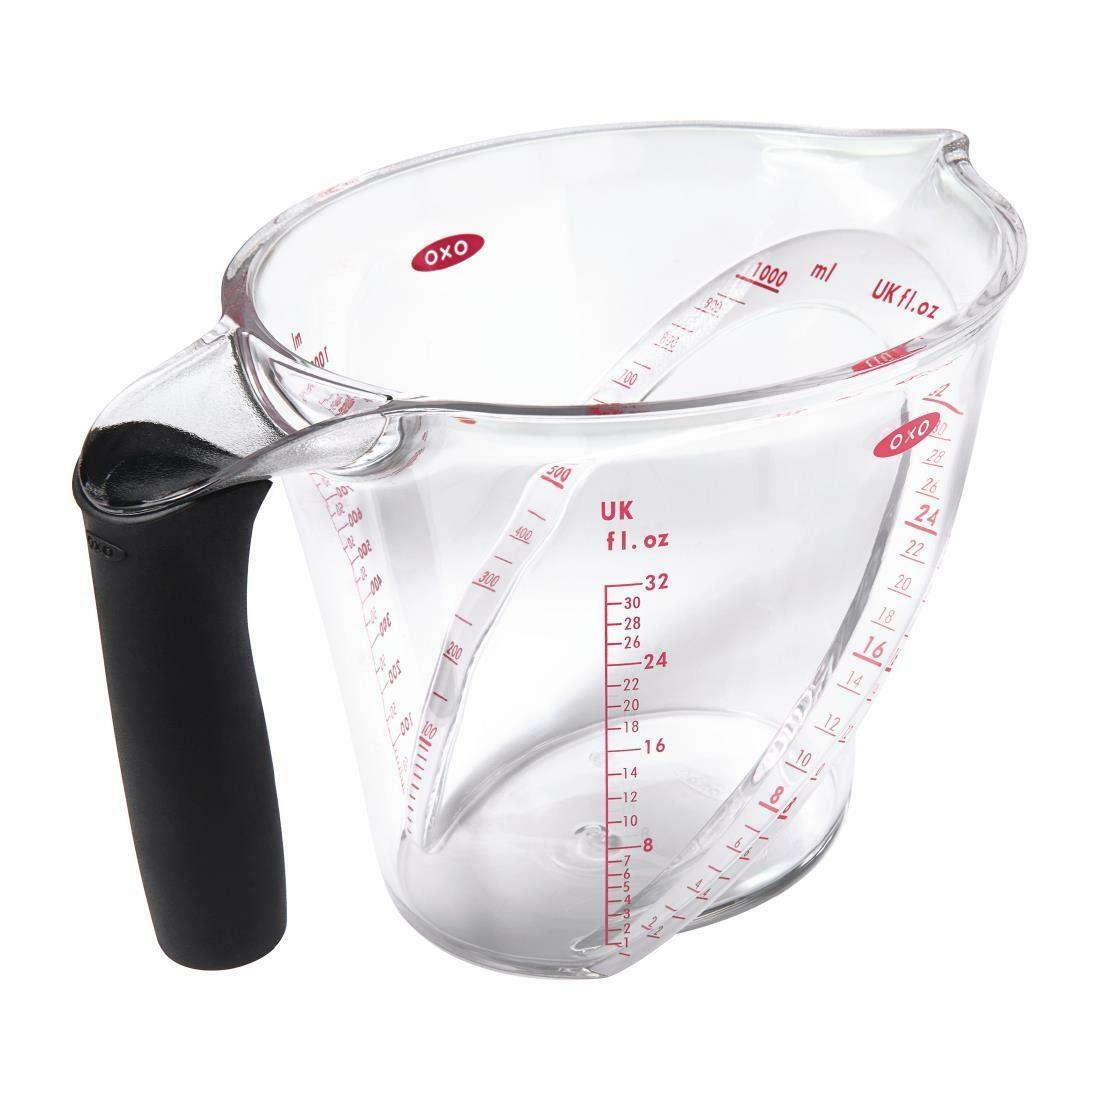 Plastico Disposable Measuring Cup (1 cup / 8oz. / 250ml) - Clear